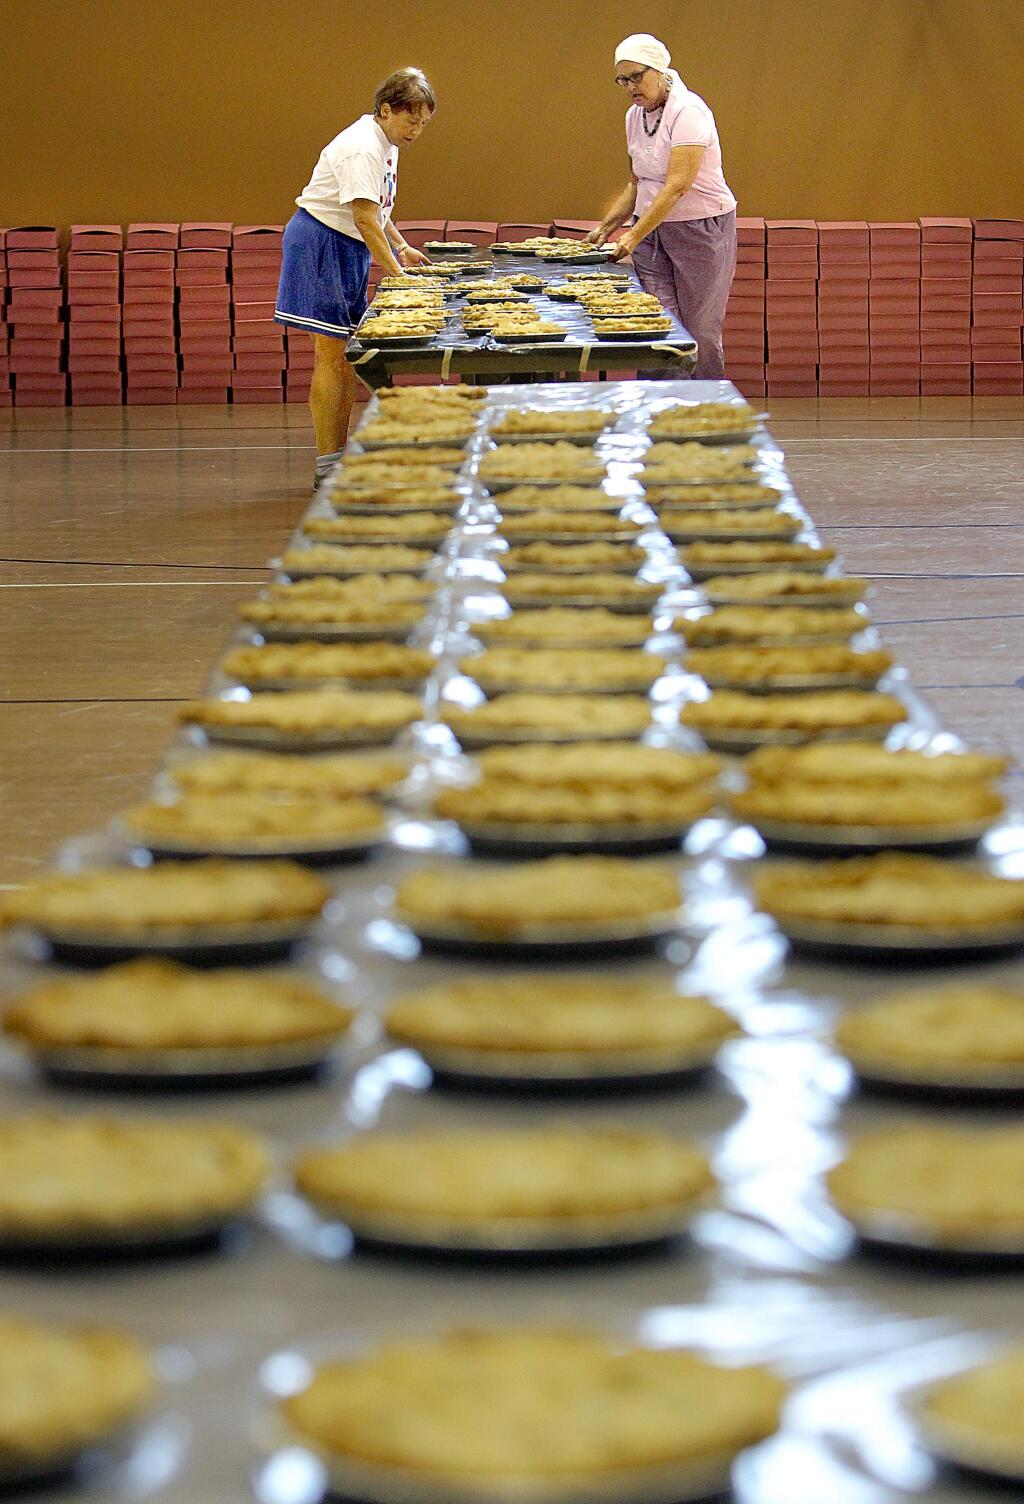 Bobbie Johanson, left, and Marian McDonald arrange some of the 1,500 cooling apple pies on Friday at the Community Church of Sebastopol.